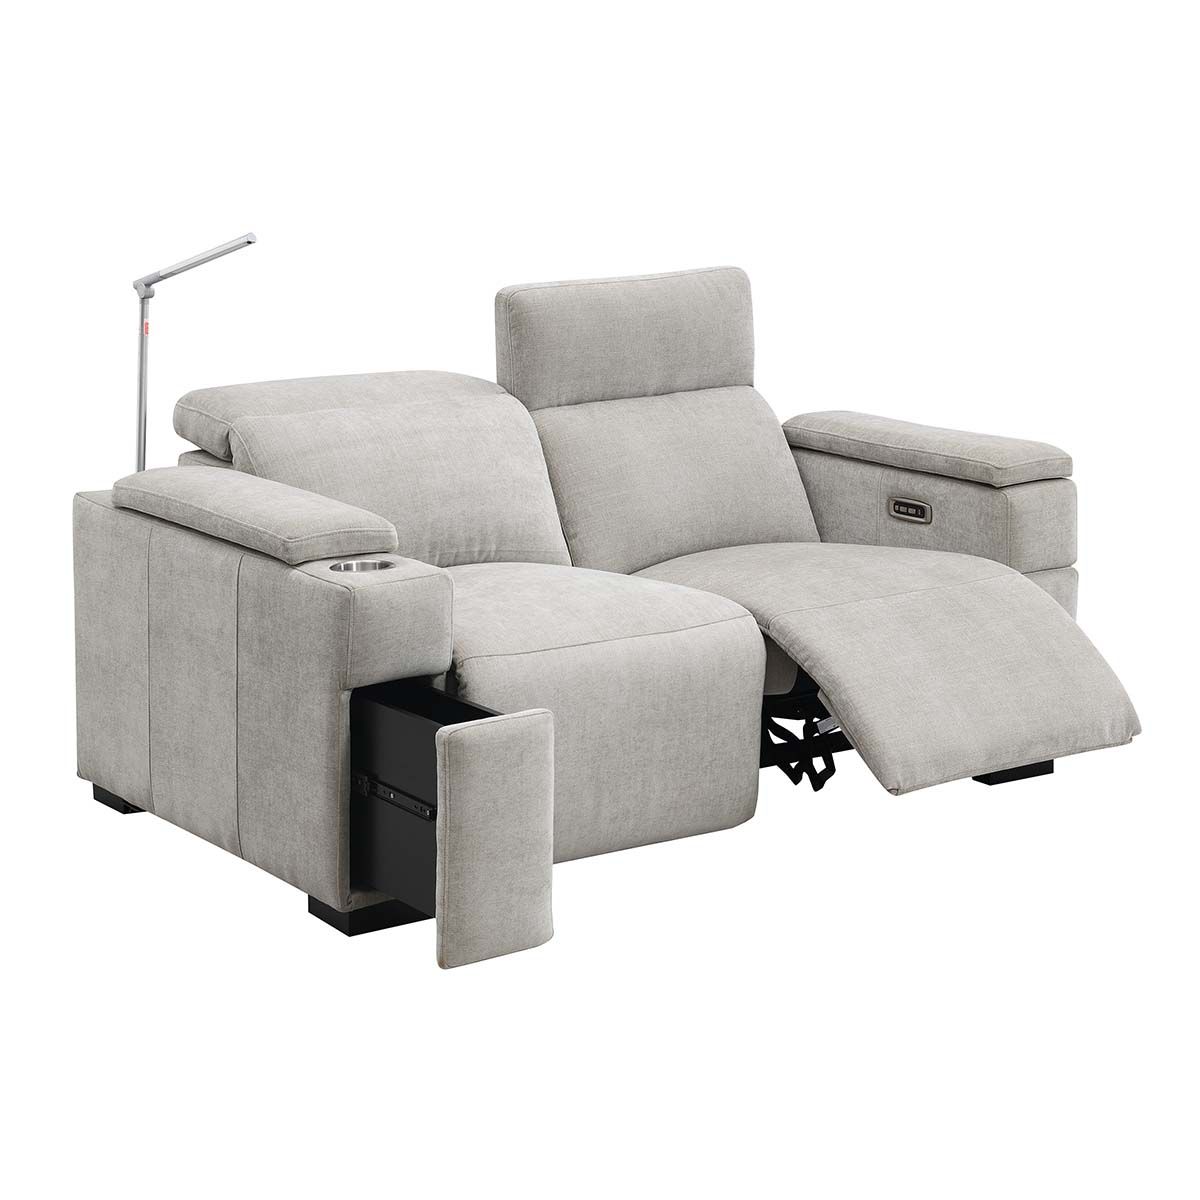 RowOne Calveri - Taupe Patterned Polyester Microfiber Fabric - Loveseat - angled front view - opened